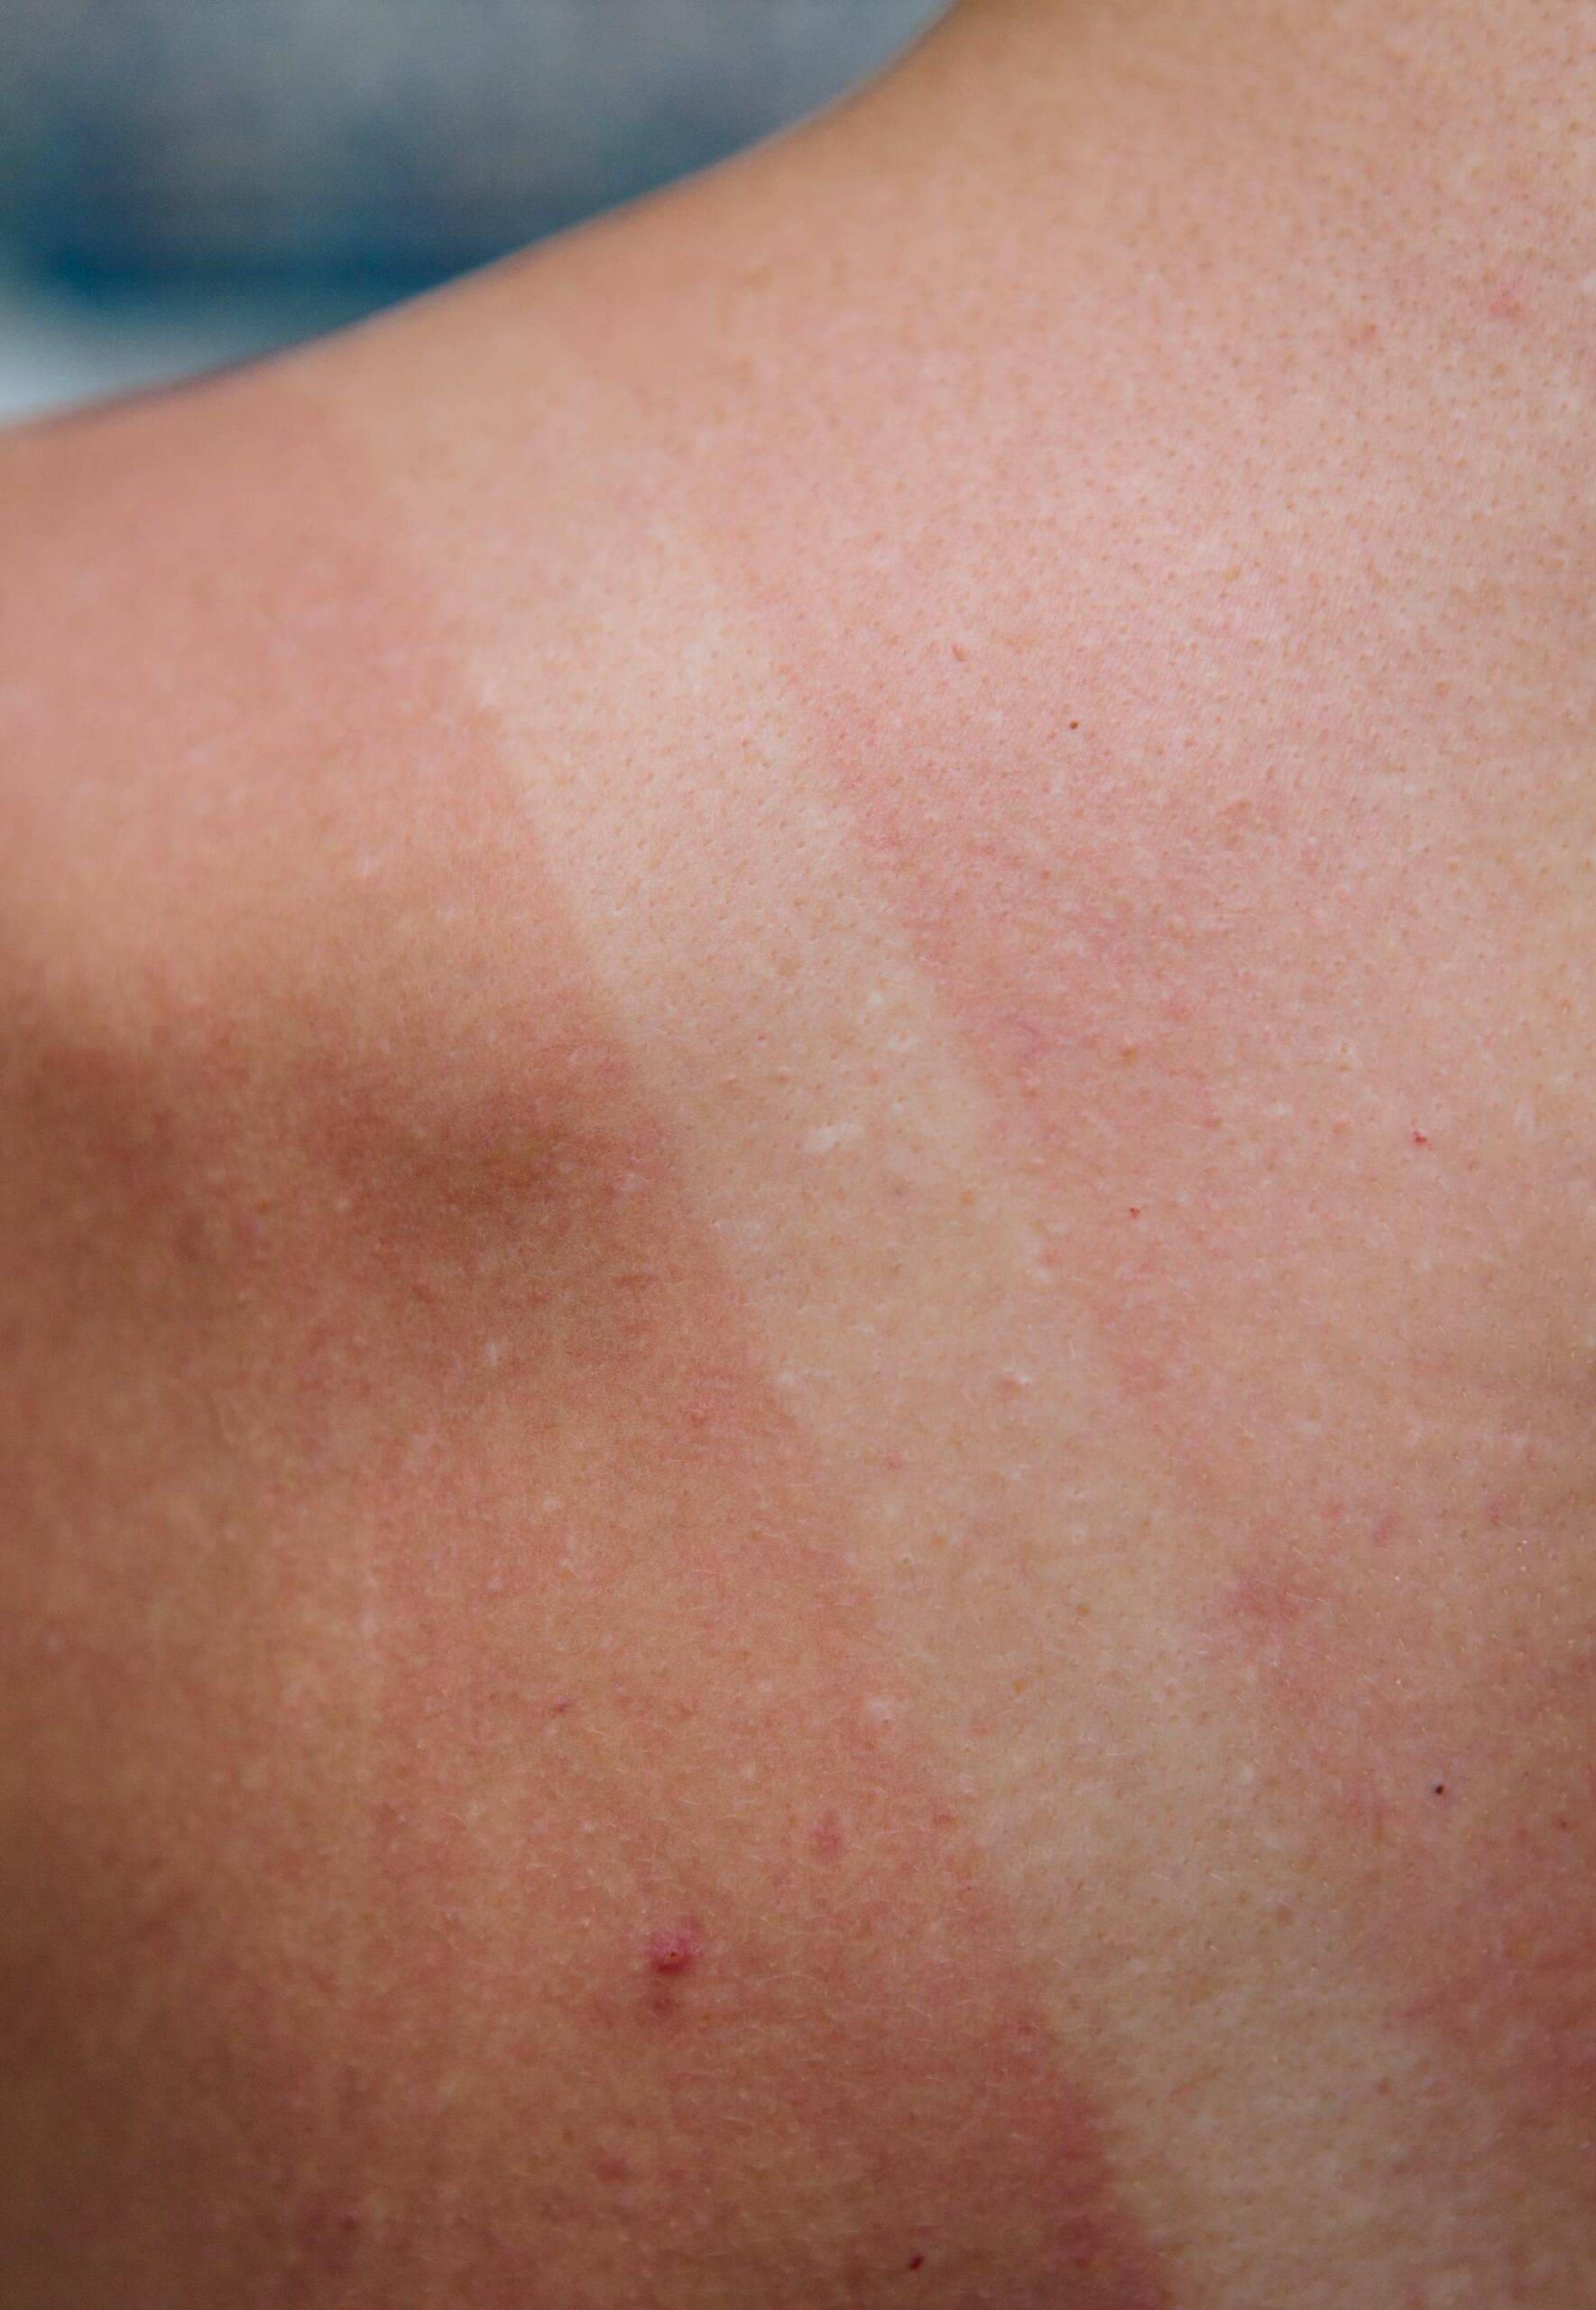 A womans sun burned back, showing the shape of her absent swimming costume, where she hasn't burnt. This is a real accidental incidence of sun burn on a fair skinned middle aged woman through excessive sun exposure.